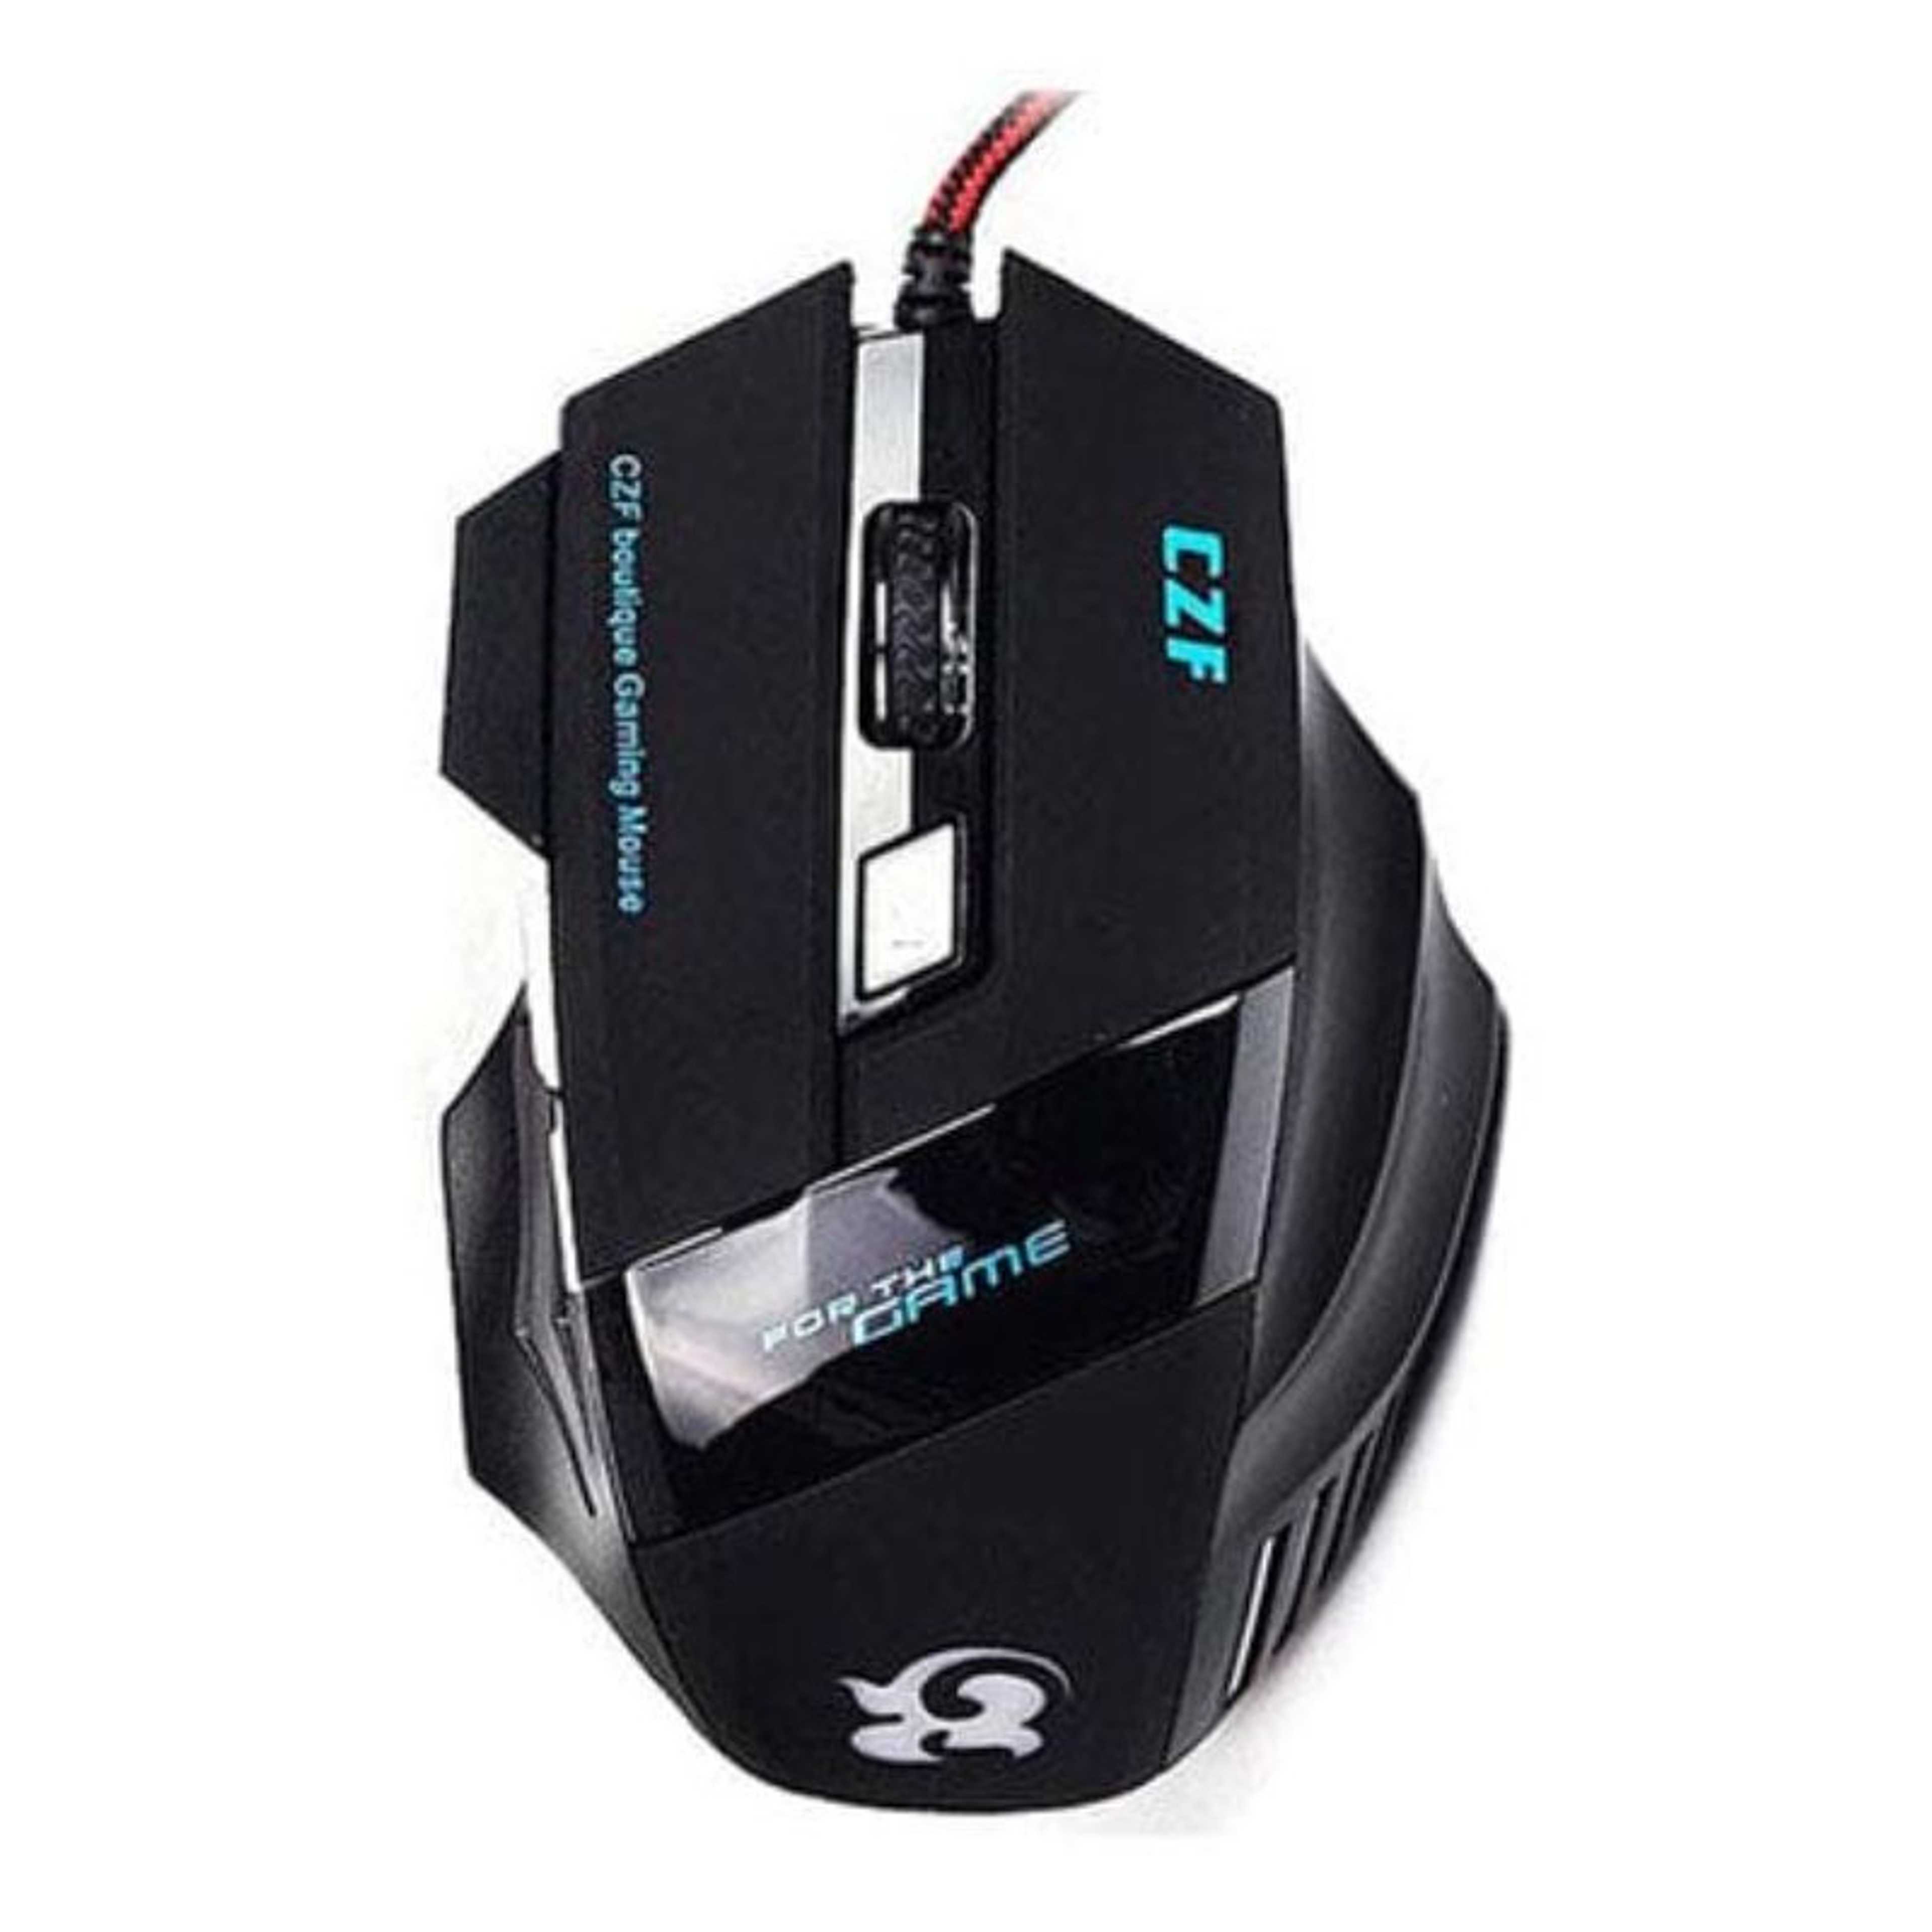 OPTICAL GAMING MOUSE WITH RGB LIGHTS 6 BUTTONS T6 GAMING MOUSE